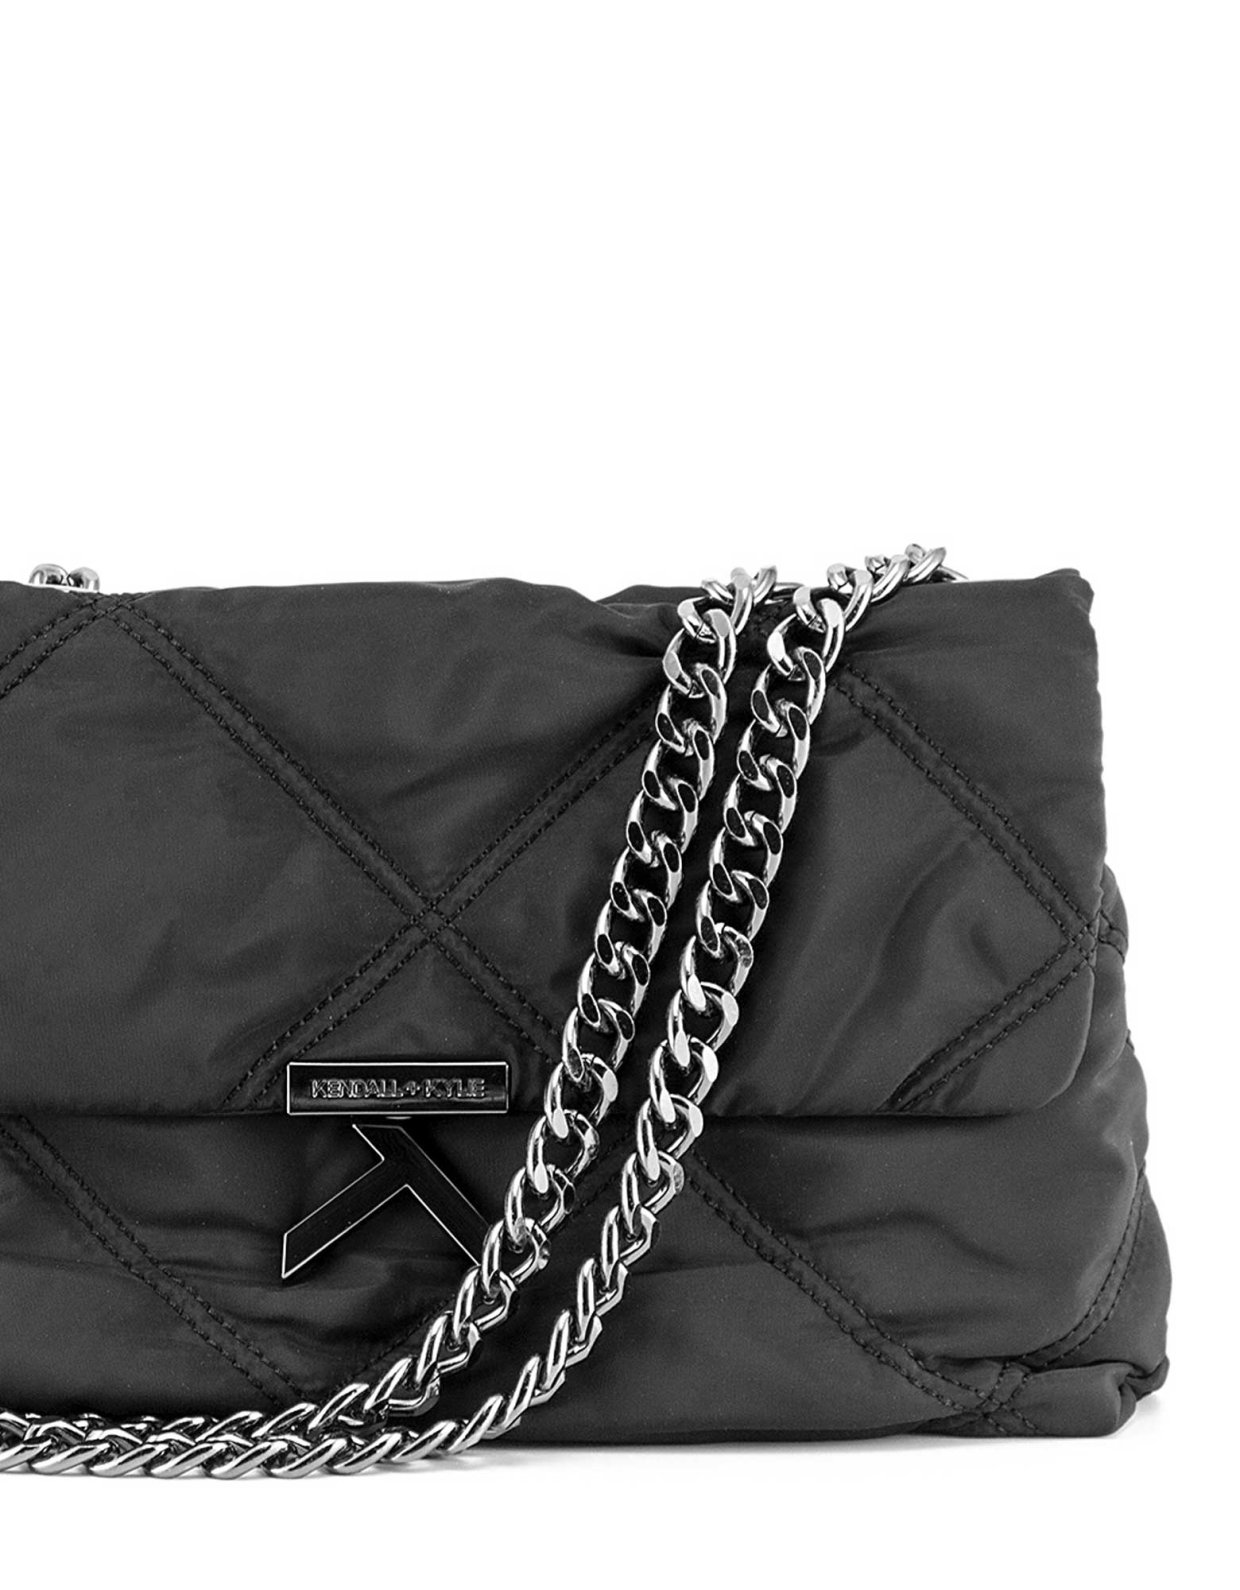 Kendall + Kylie Alexis quilted nylon bag black